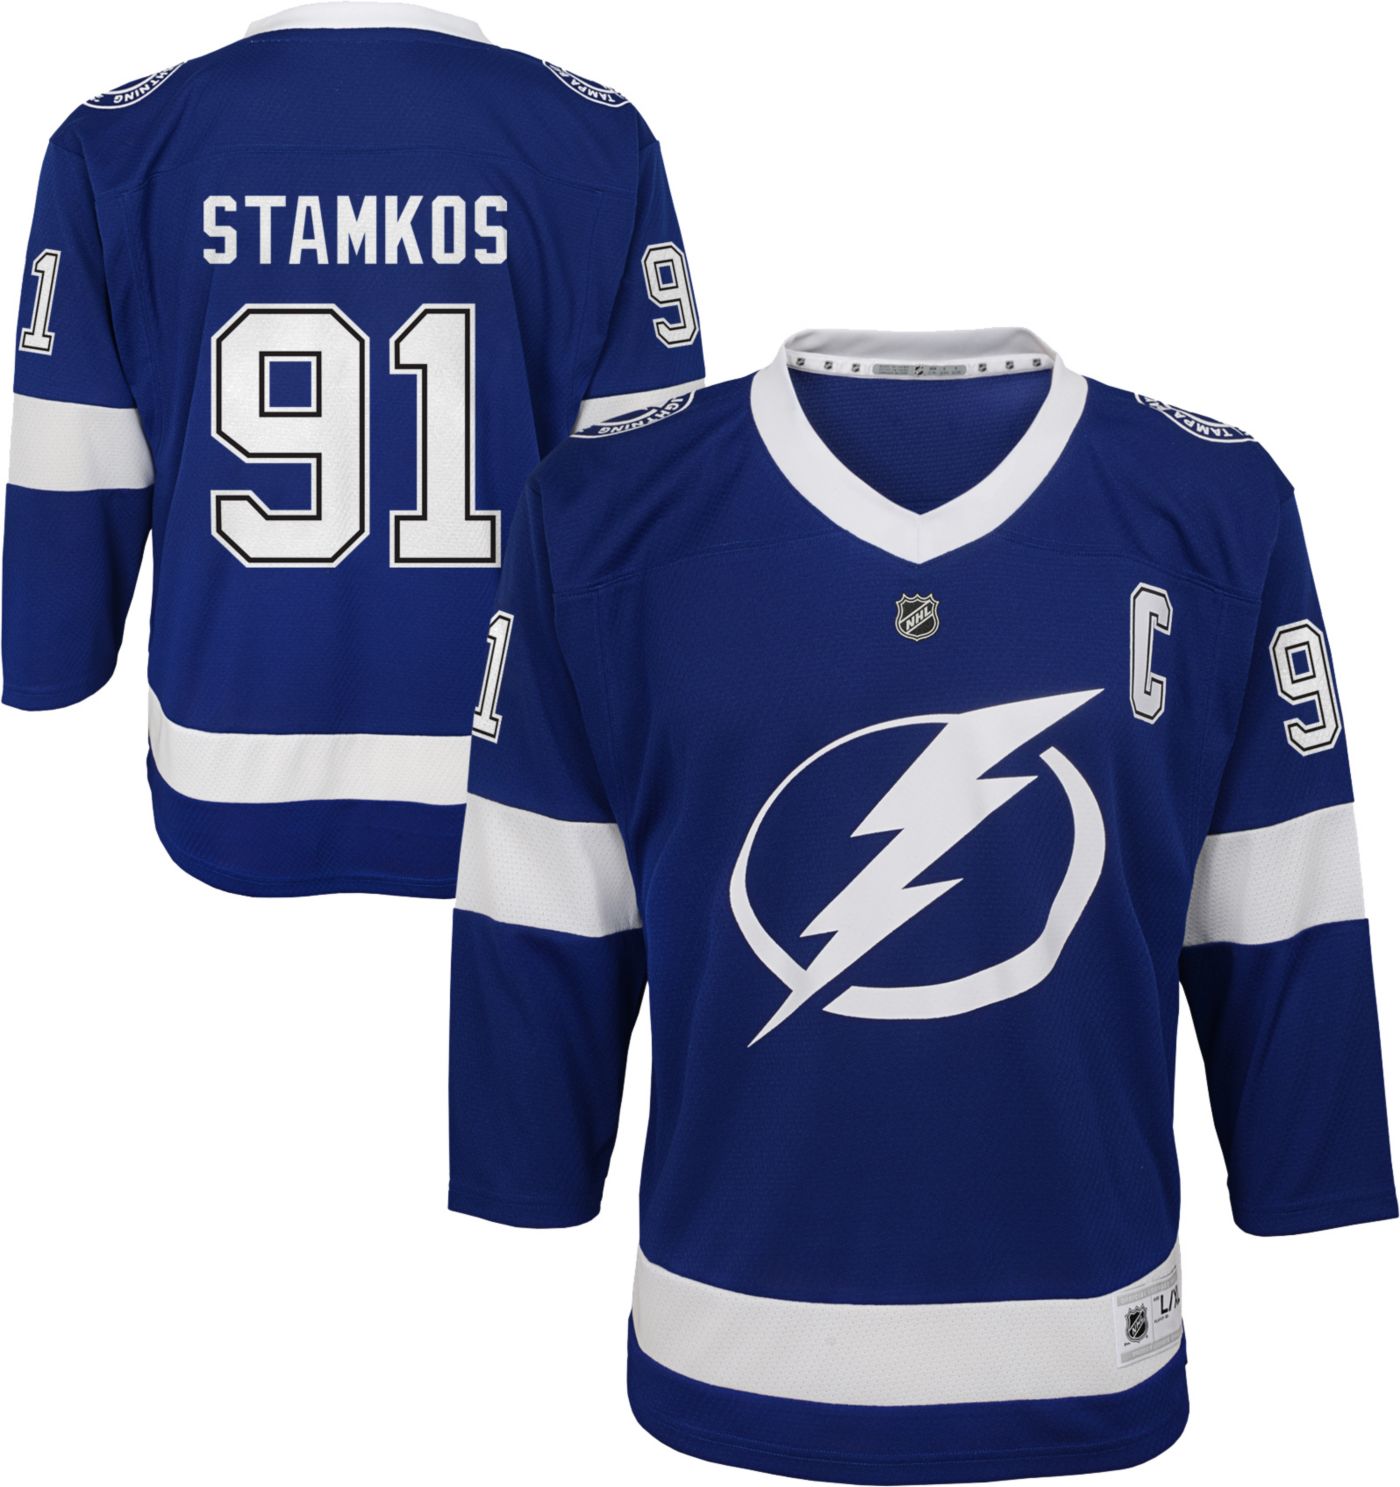 NHL Youth Tampa Bay Lightning Steven Stamkos #91 Replica Home Jersey   DICK'S Sporting ...